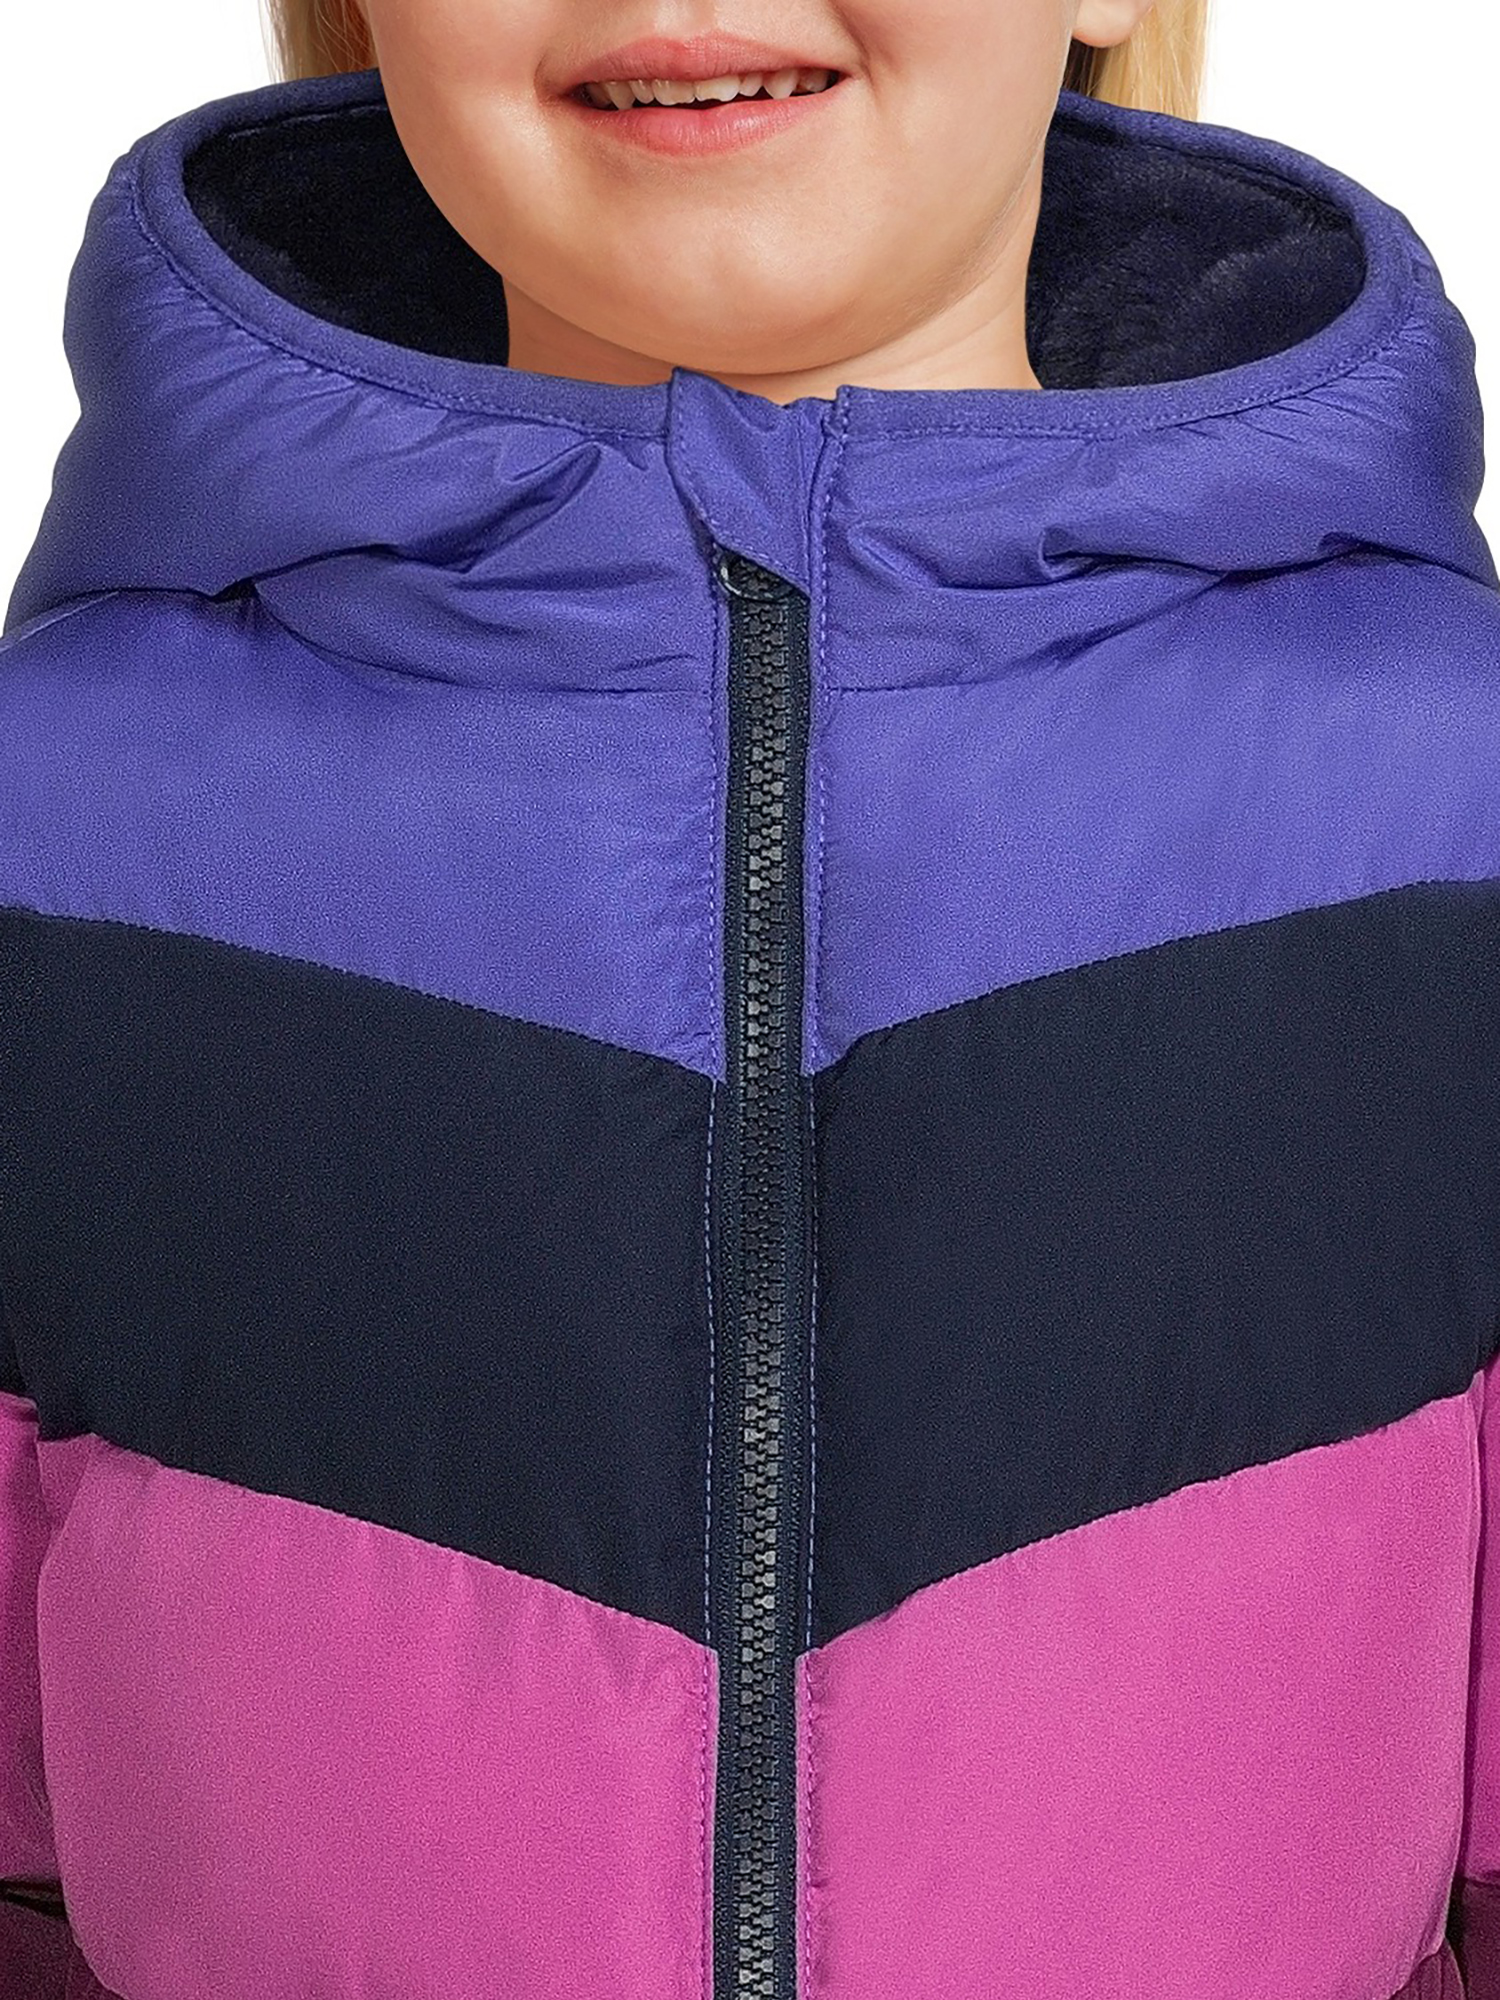 Swiss Tech Baby and Toddler Girls Puffer Jacket with Hood, Sizes 12M-5T - image 4 of 6